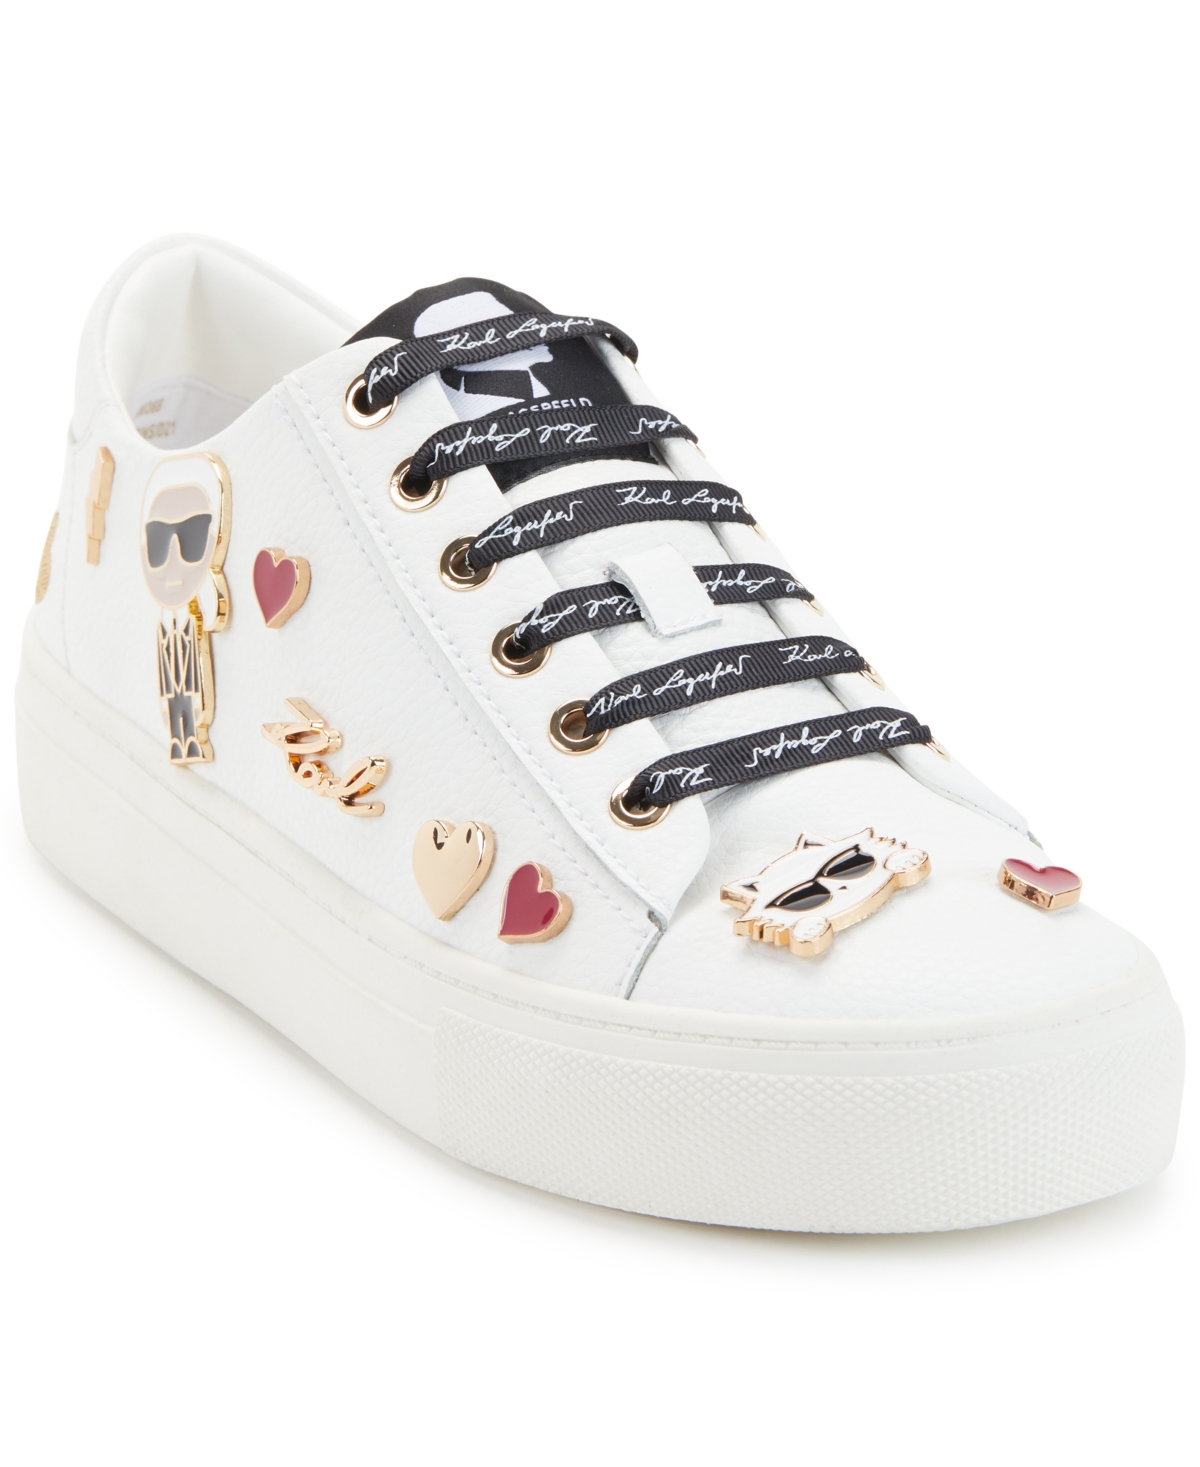 Women's Cate Embellished Sneakers - Black